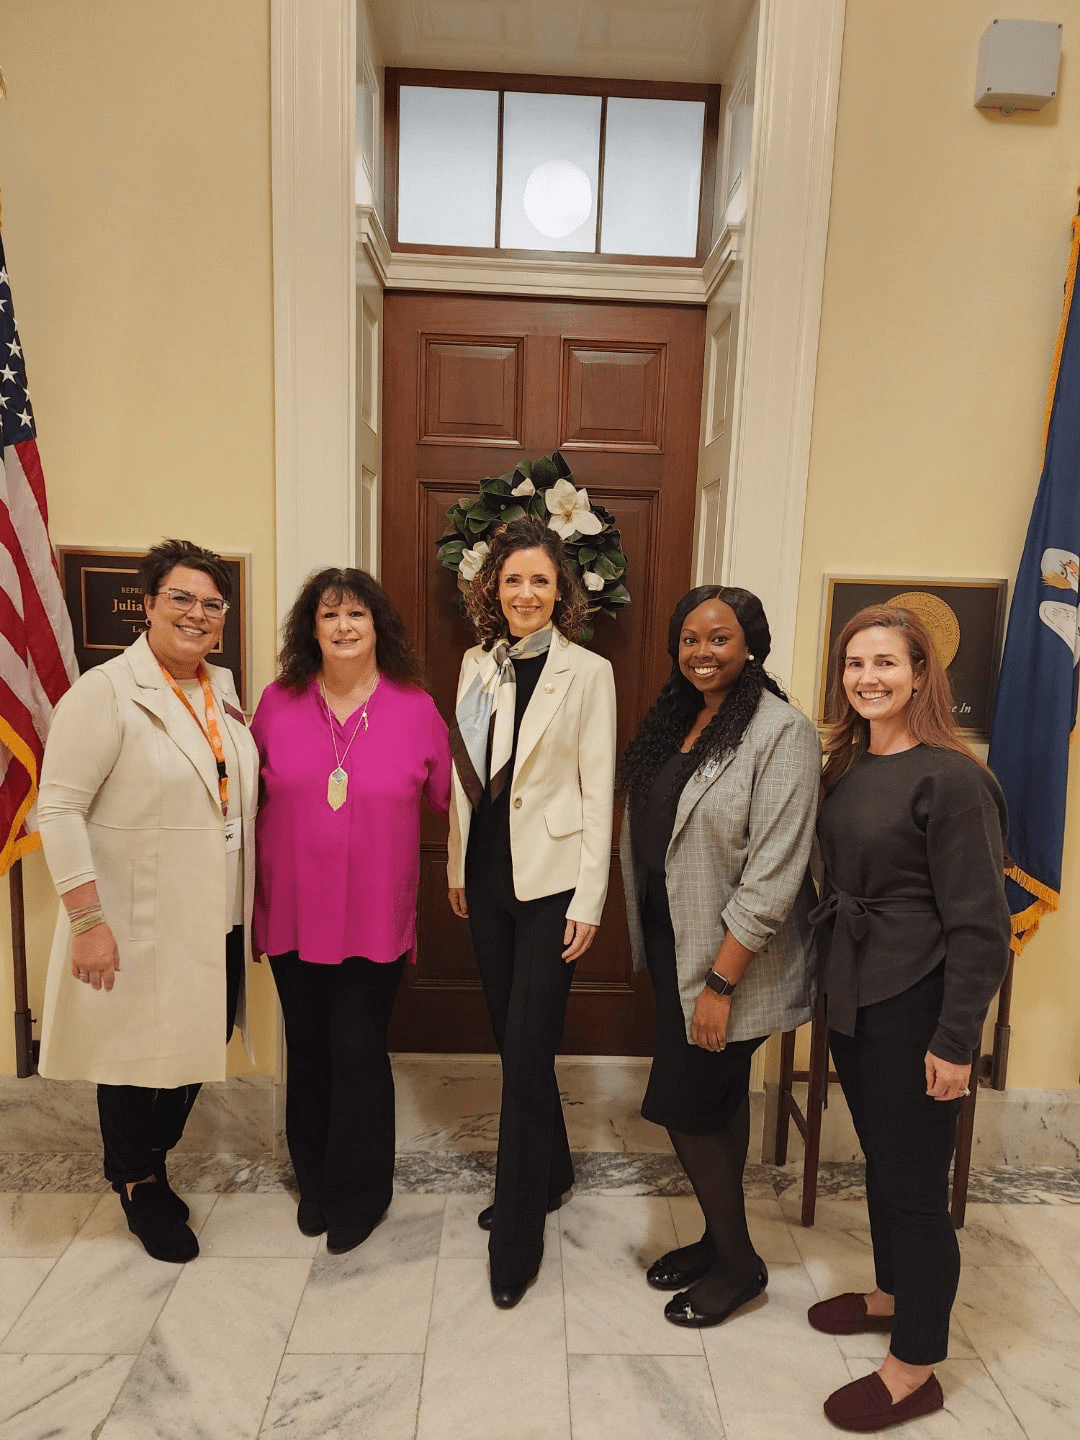 LAAEYC Members, Tafta Miller, Cindy Bishop, Courtney Rogers, and Rebecca Teal with Congresswoman Julia Letlow (center)